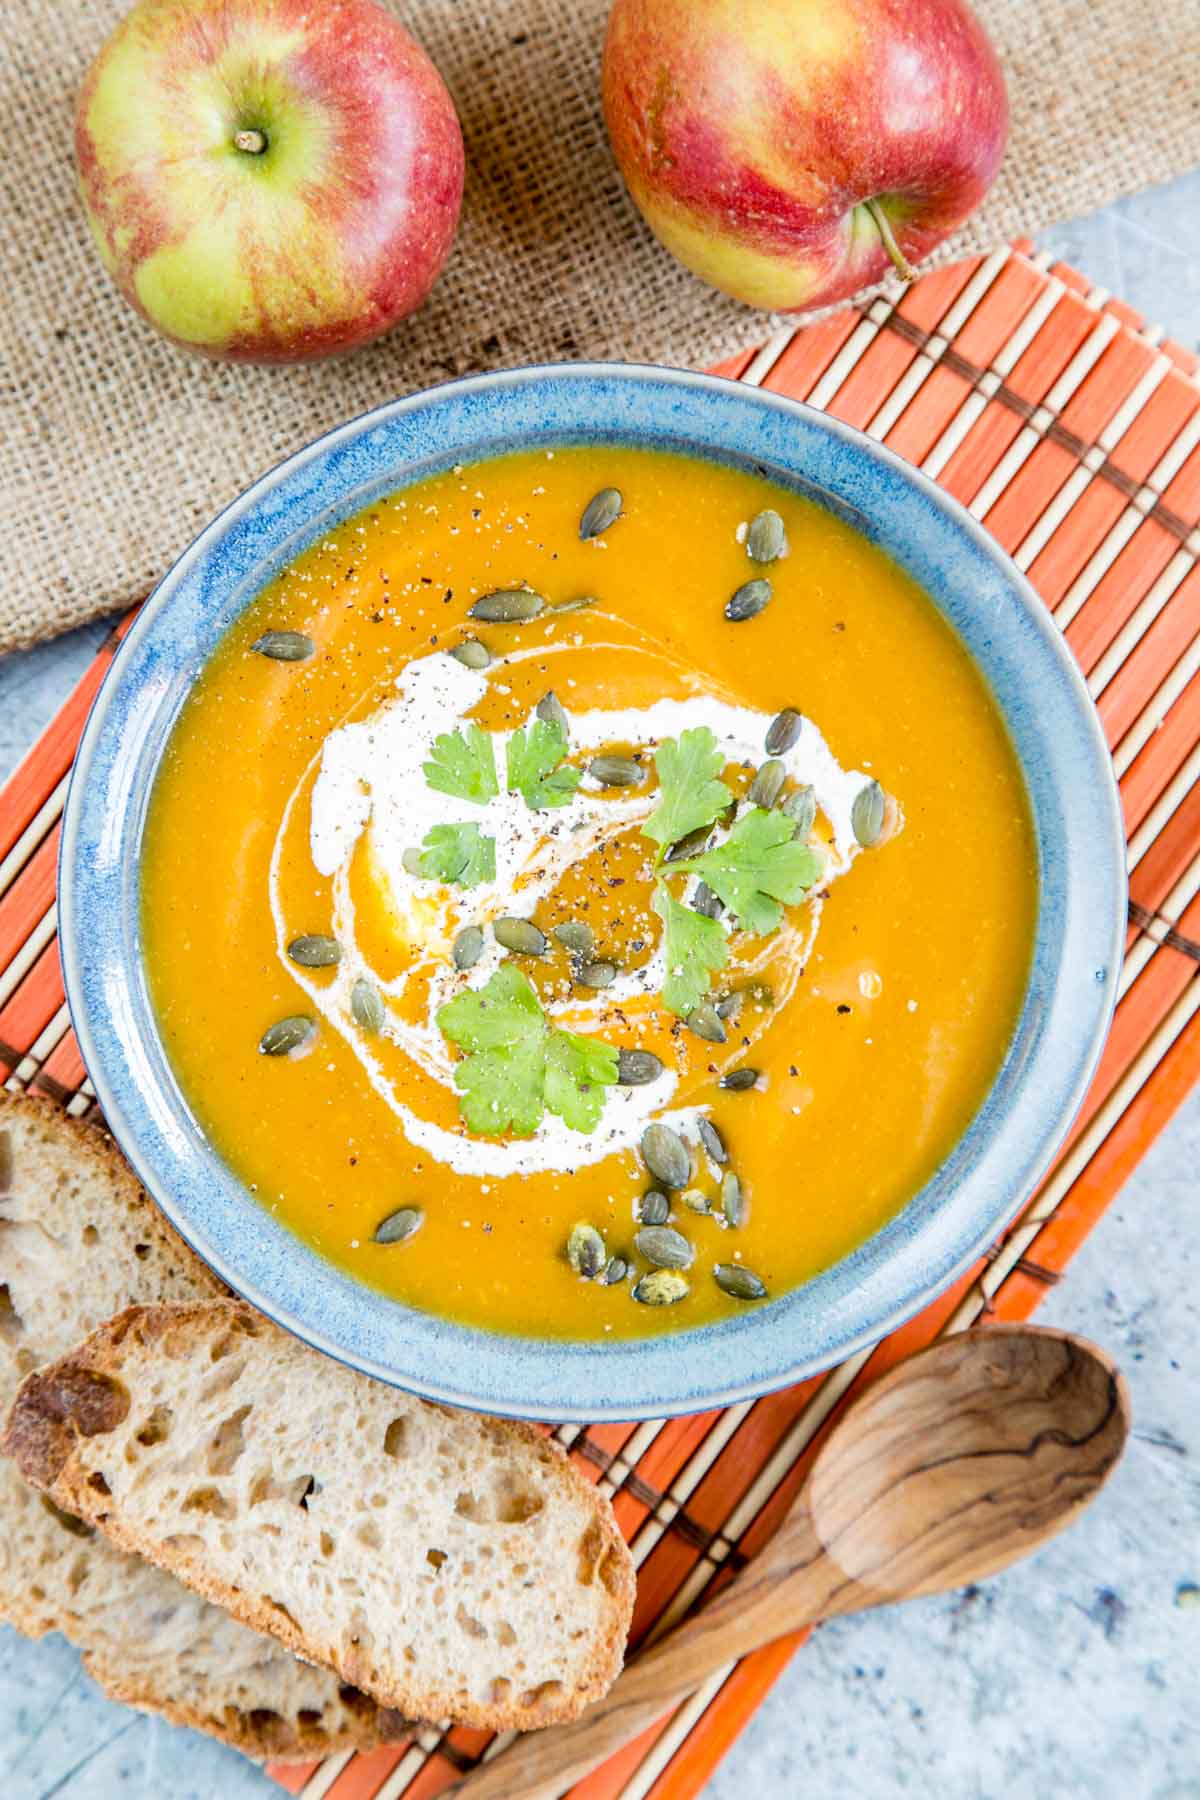 A delicious bowl of pumpkin and apple soup, golden orange and garnished with cream, parsley and pumpkin seeds, served in a contrasting blue bowl.